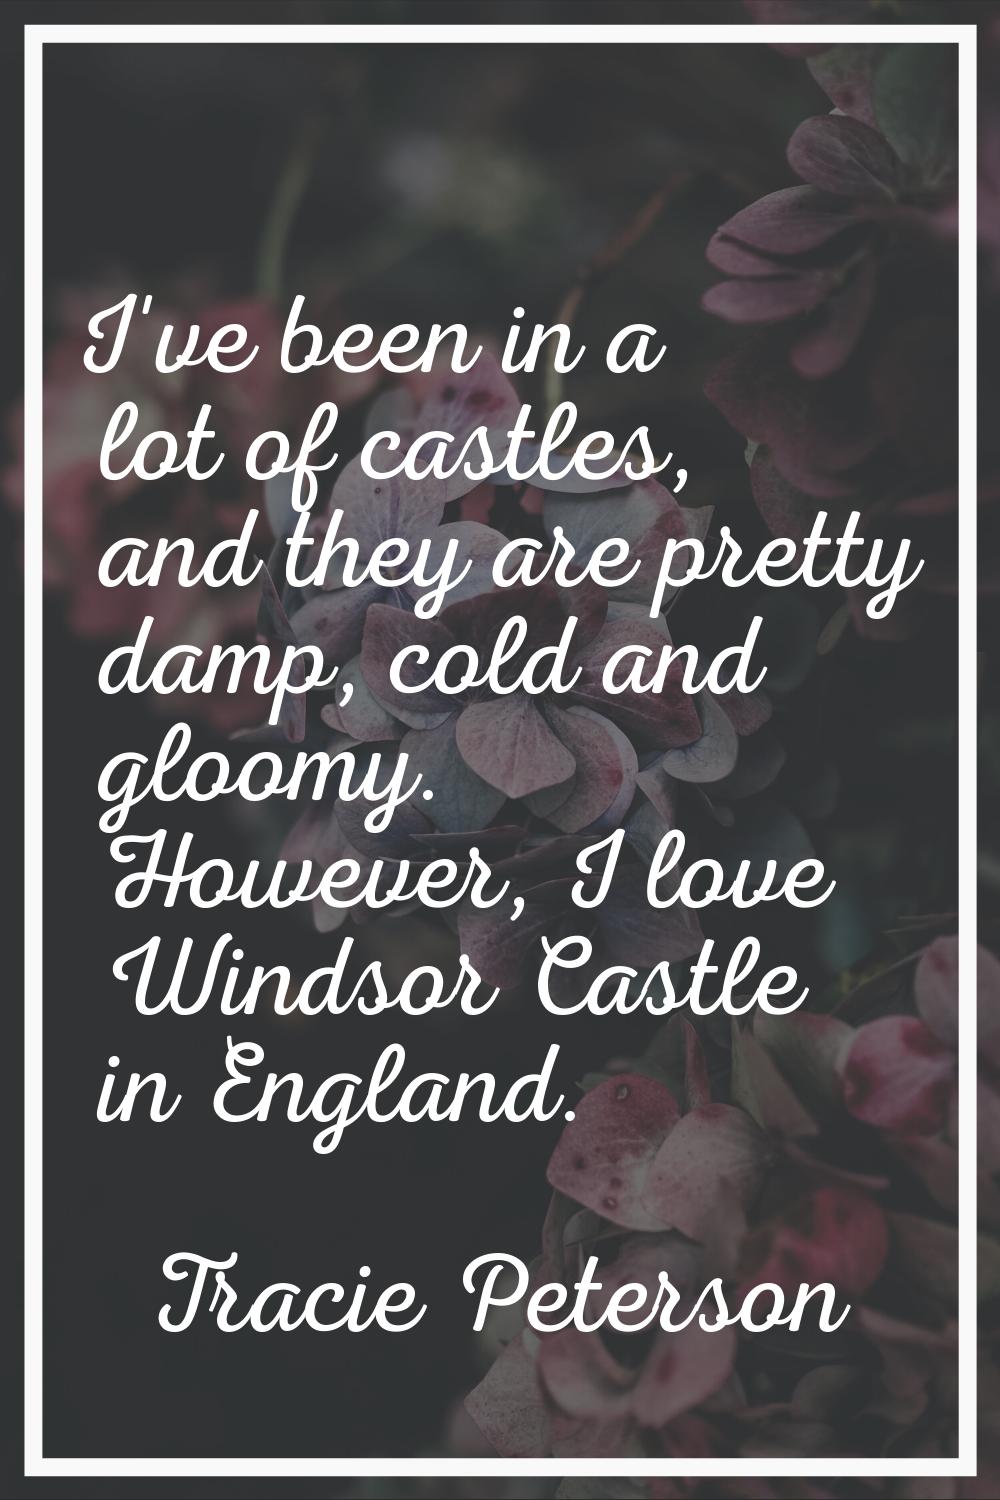 I've been in a lot of castles, and they are pretty damp, cold and gloomy. However, I love Windsor C